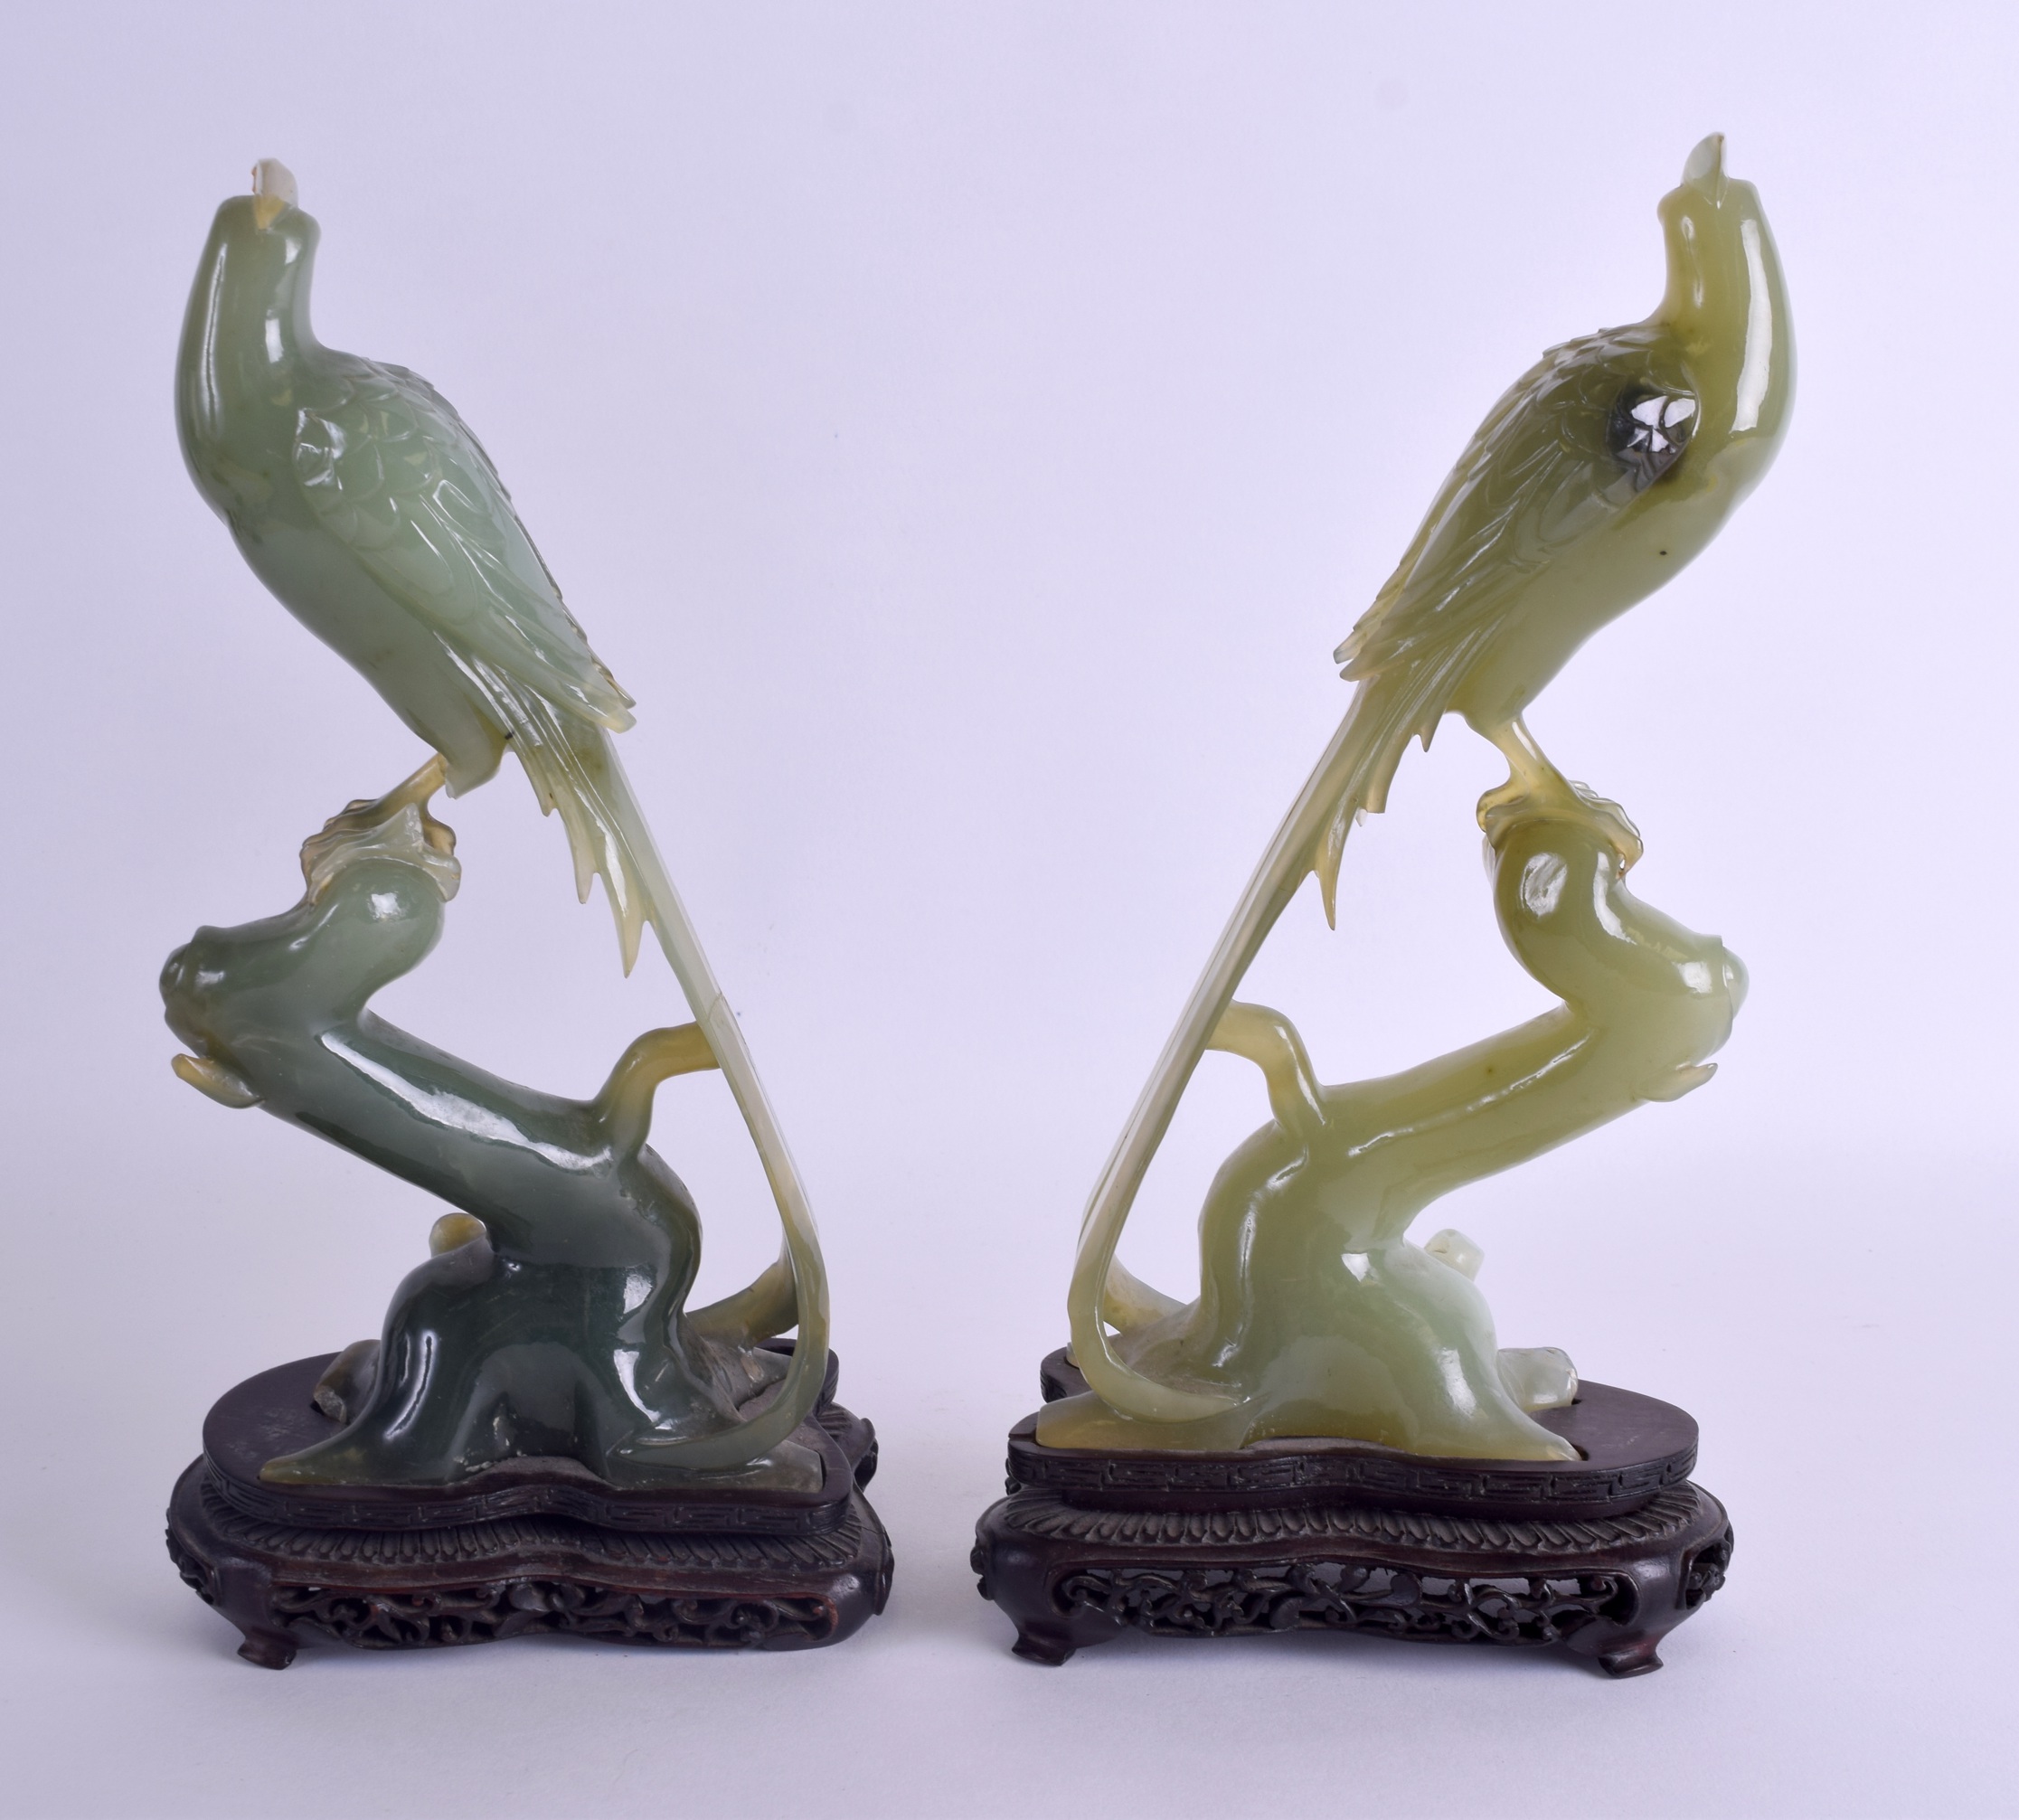 A LARGE PAIR OF 19TH CENTURY CHINESE CARVED JADE FIGURES OF BIRDS modelled upon naturalistic - Image 3 of 3